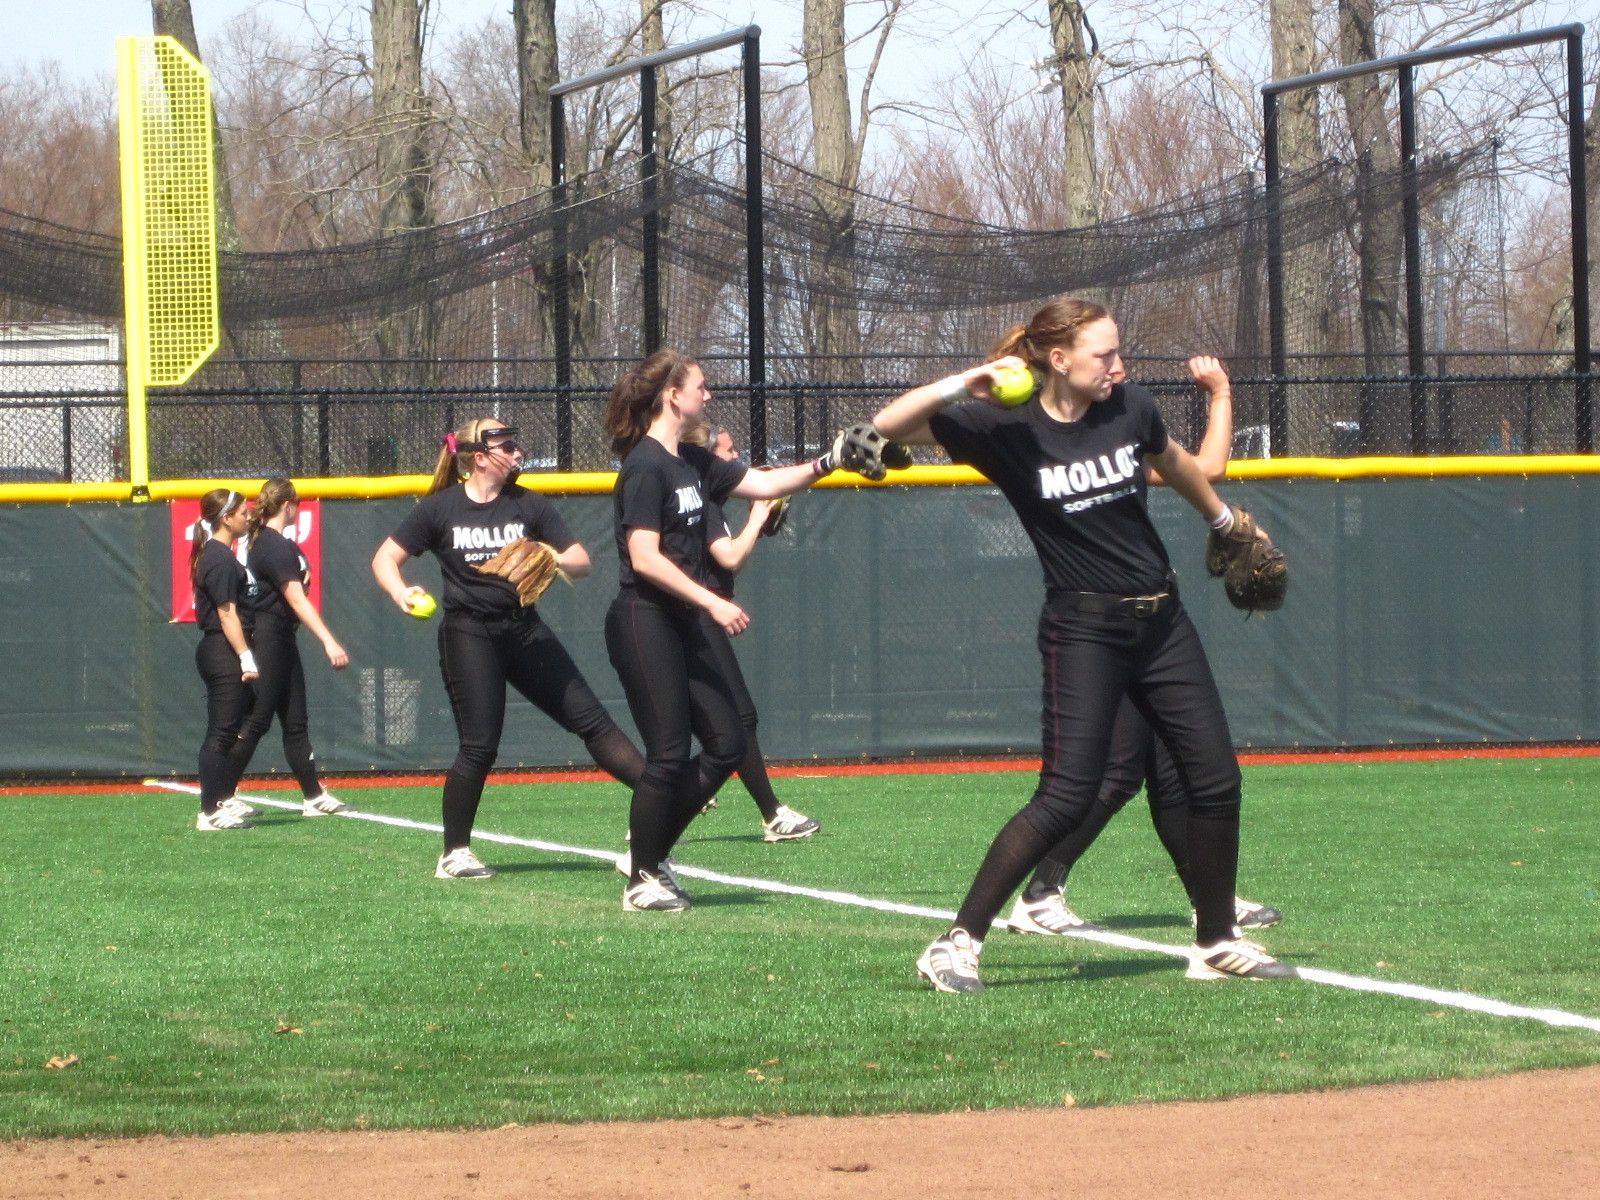 Molloy Softball players warmed up their wind-ups and practiced their pitching at the new Bob Klein Softball Field on Peninsula Boulevard.